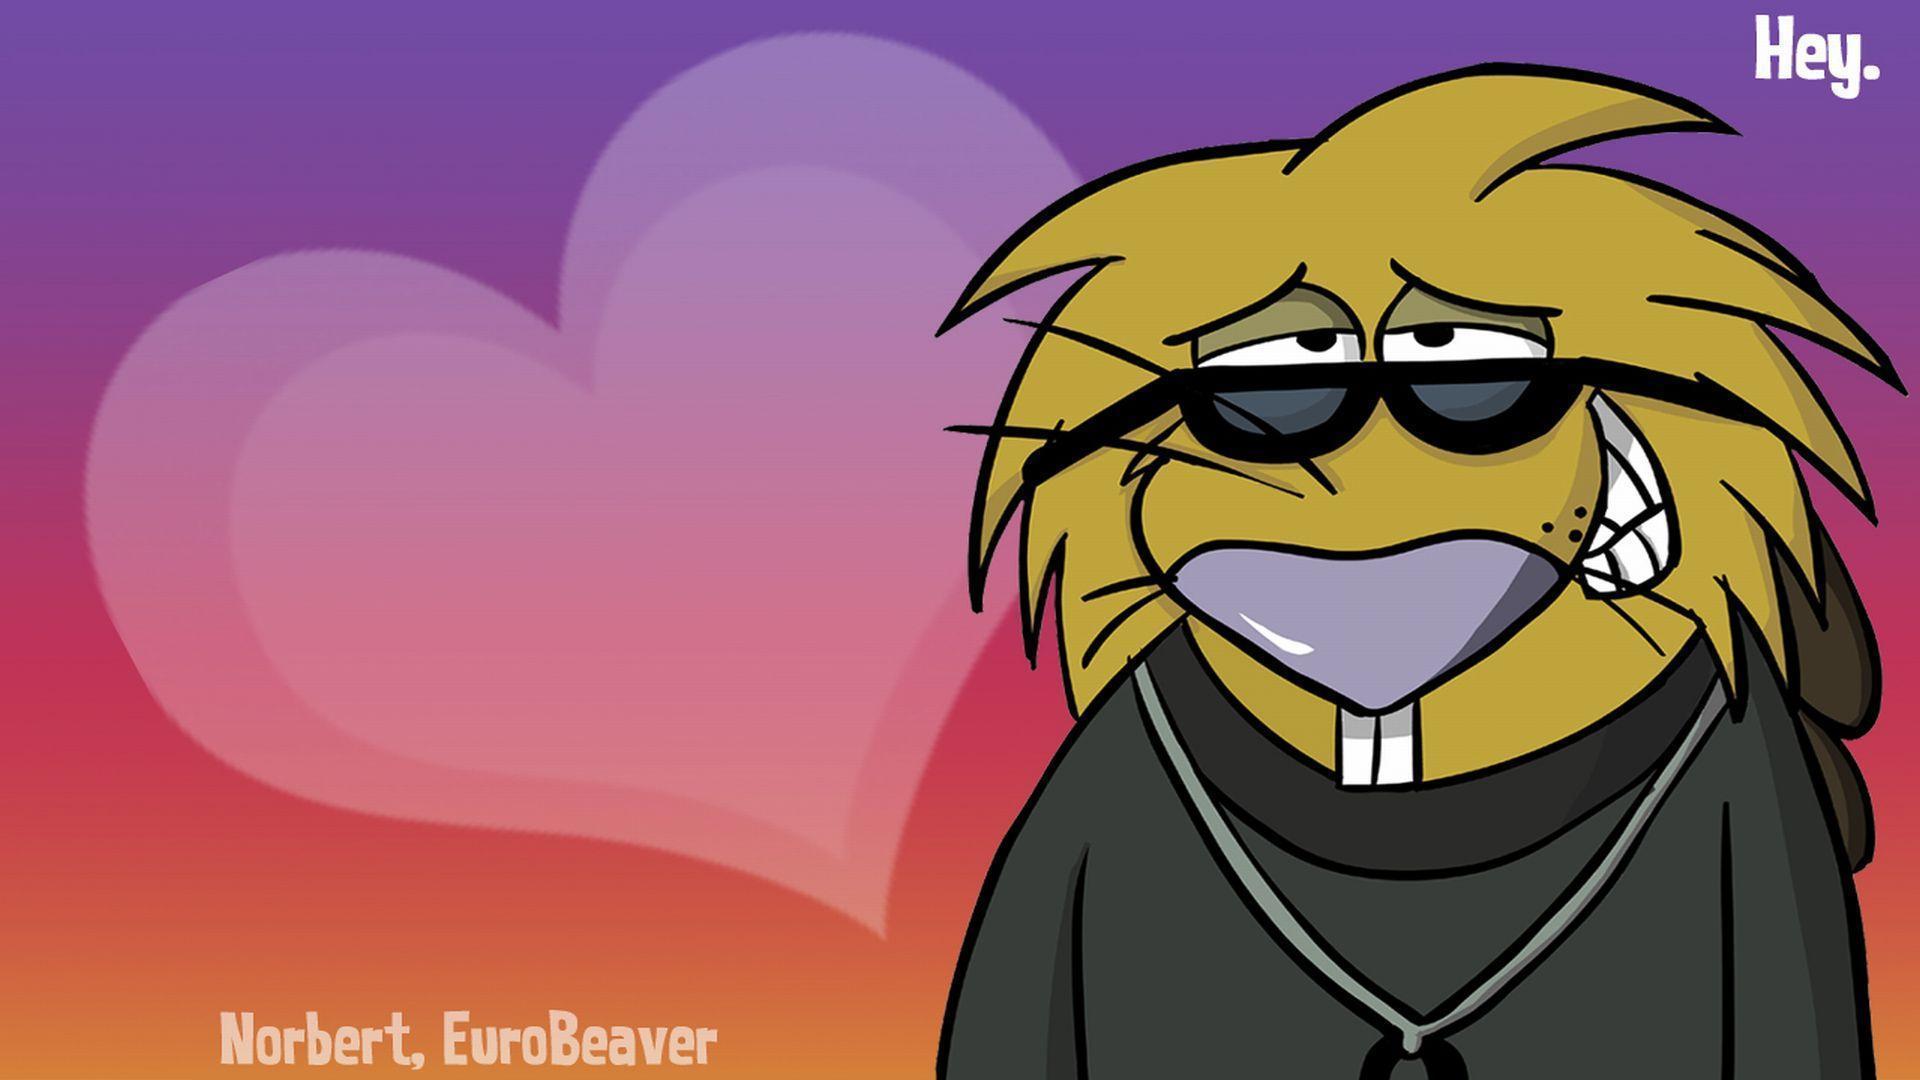 The Angry Beavers Computer Wallpaper, Desktop Background